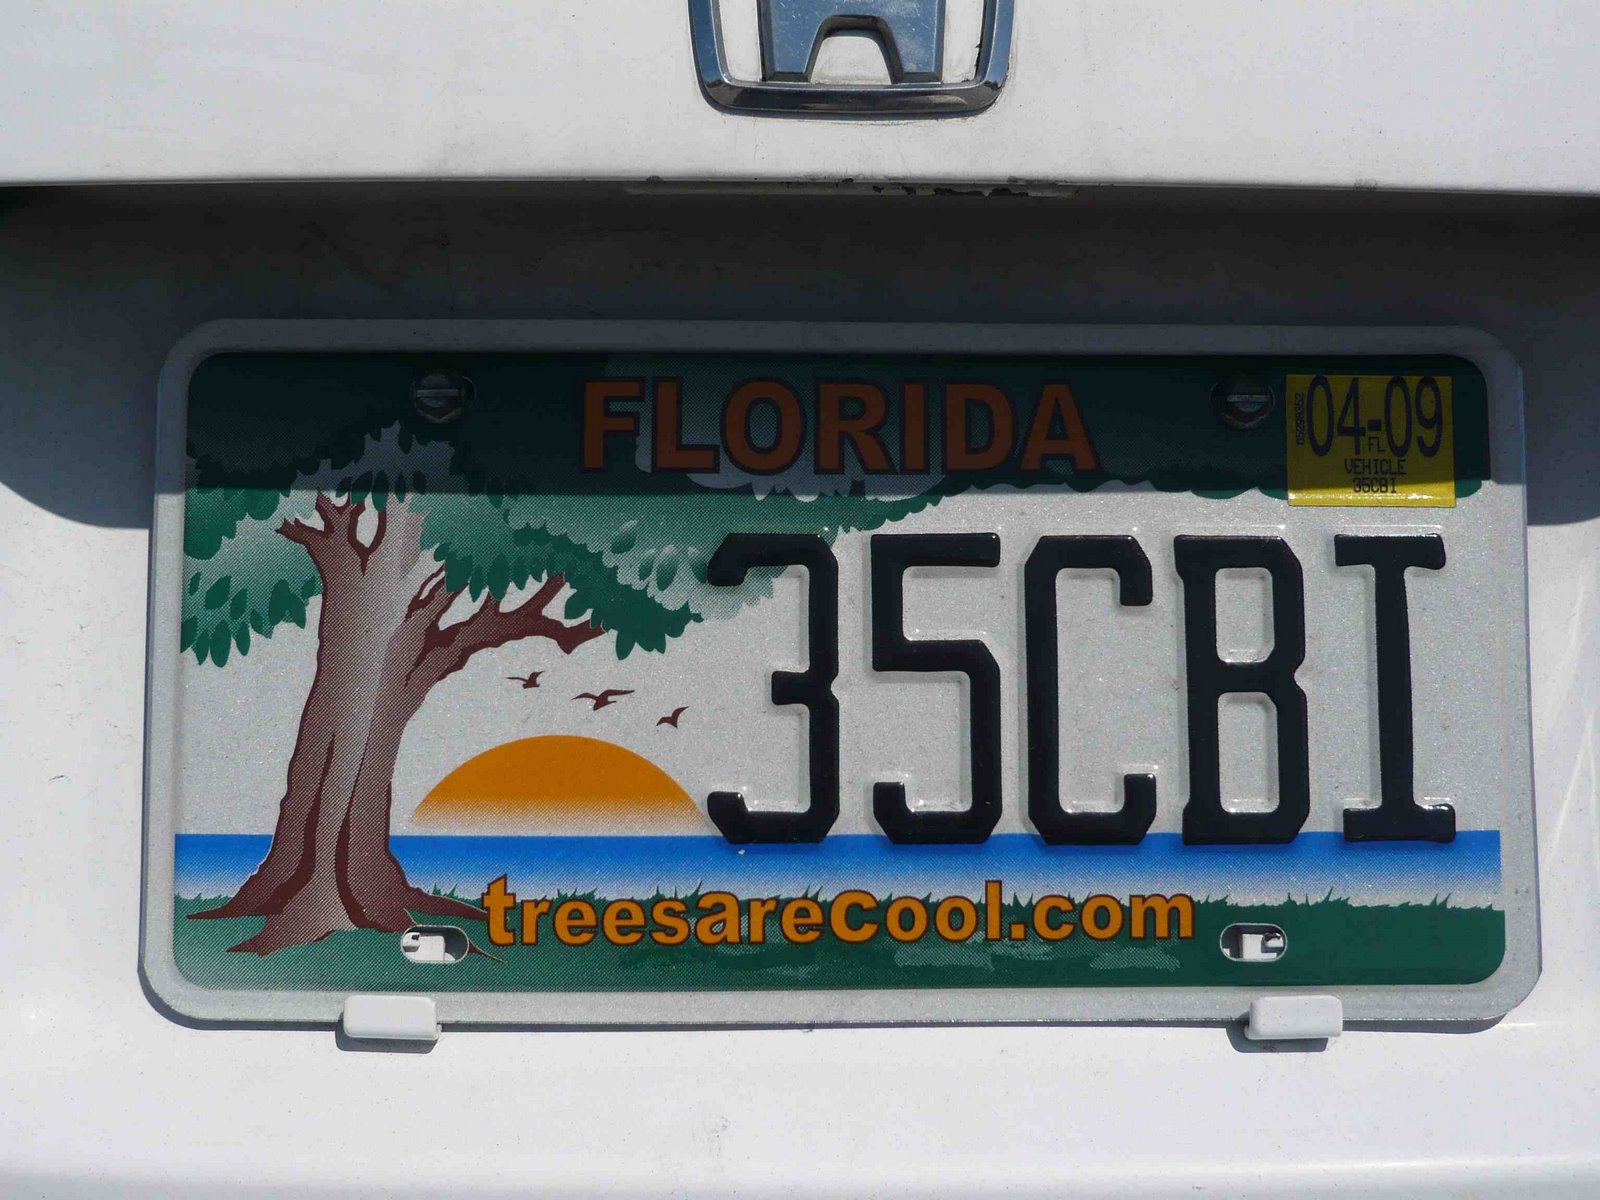 [Florida+trees+are+cool.jpg]